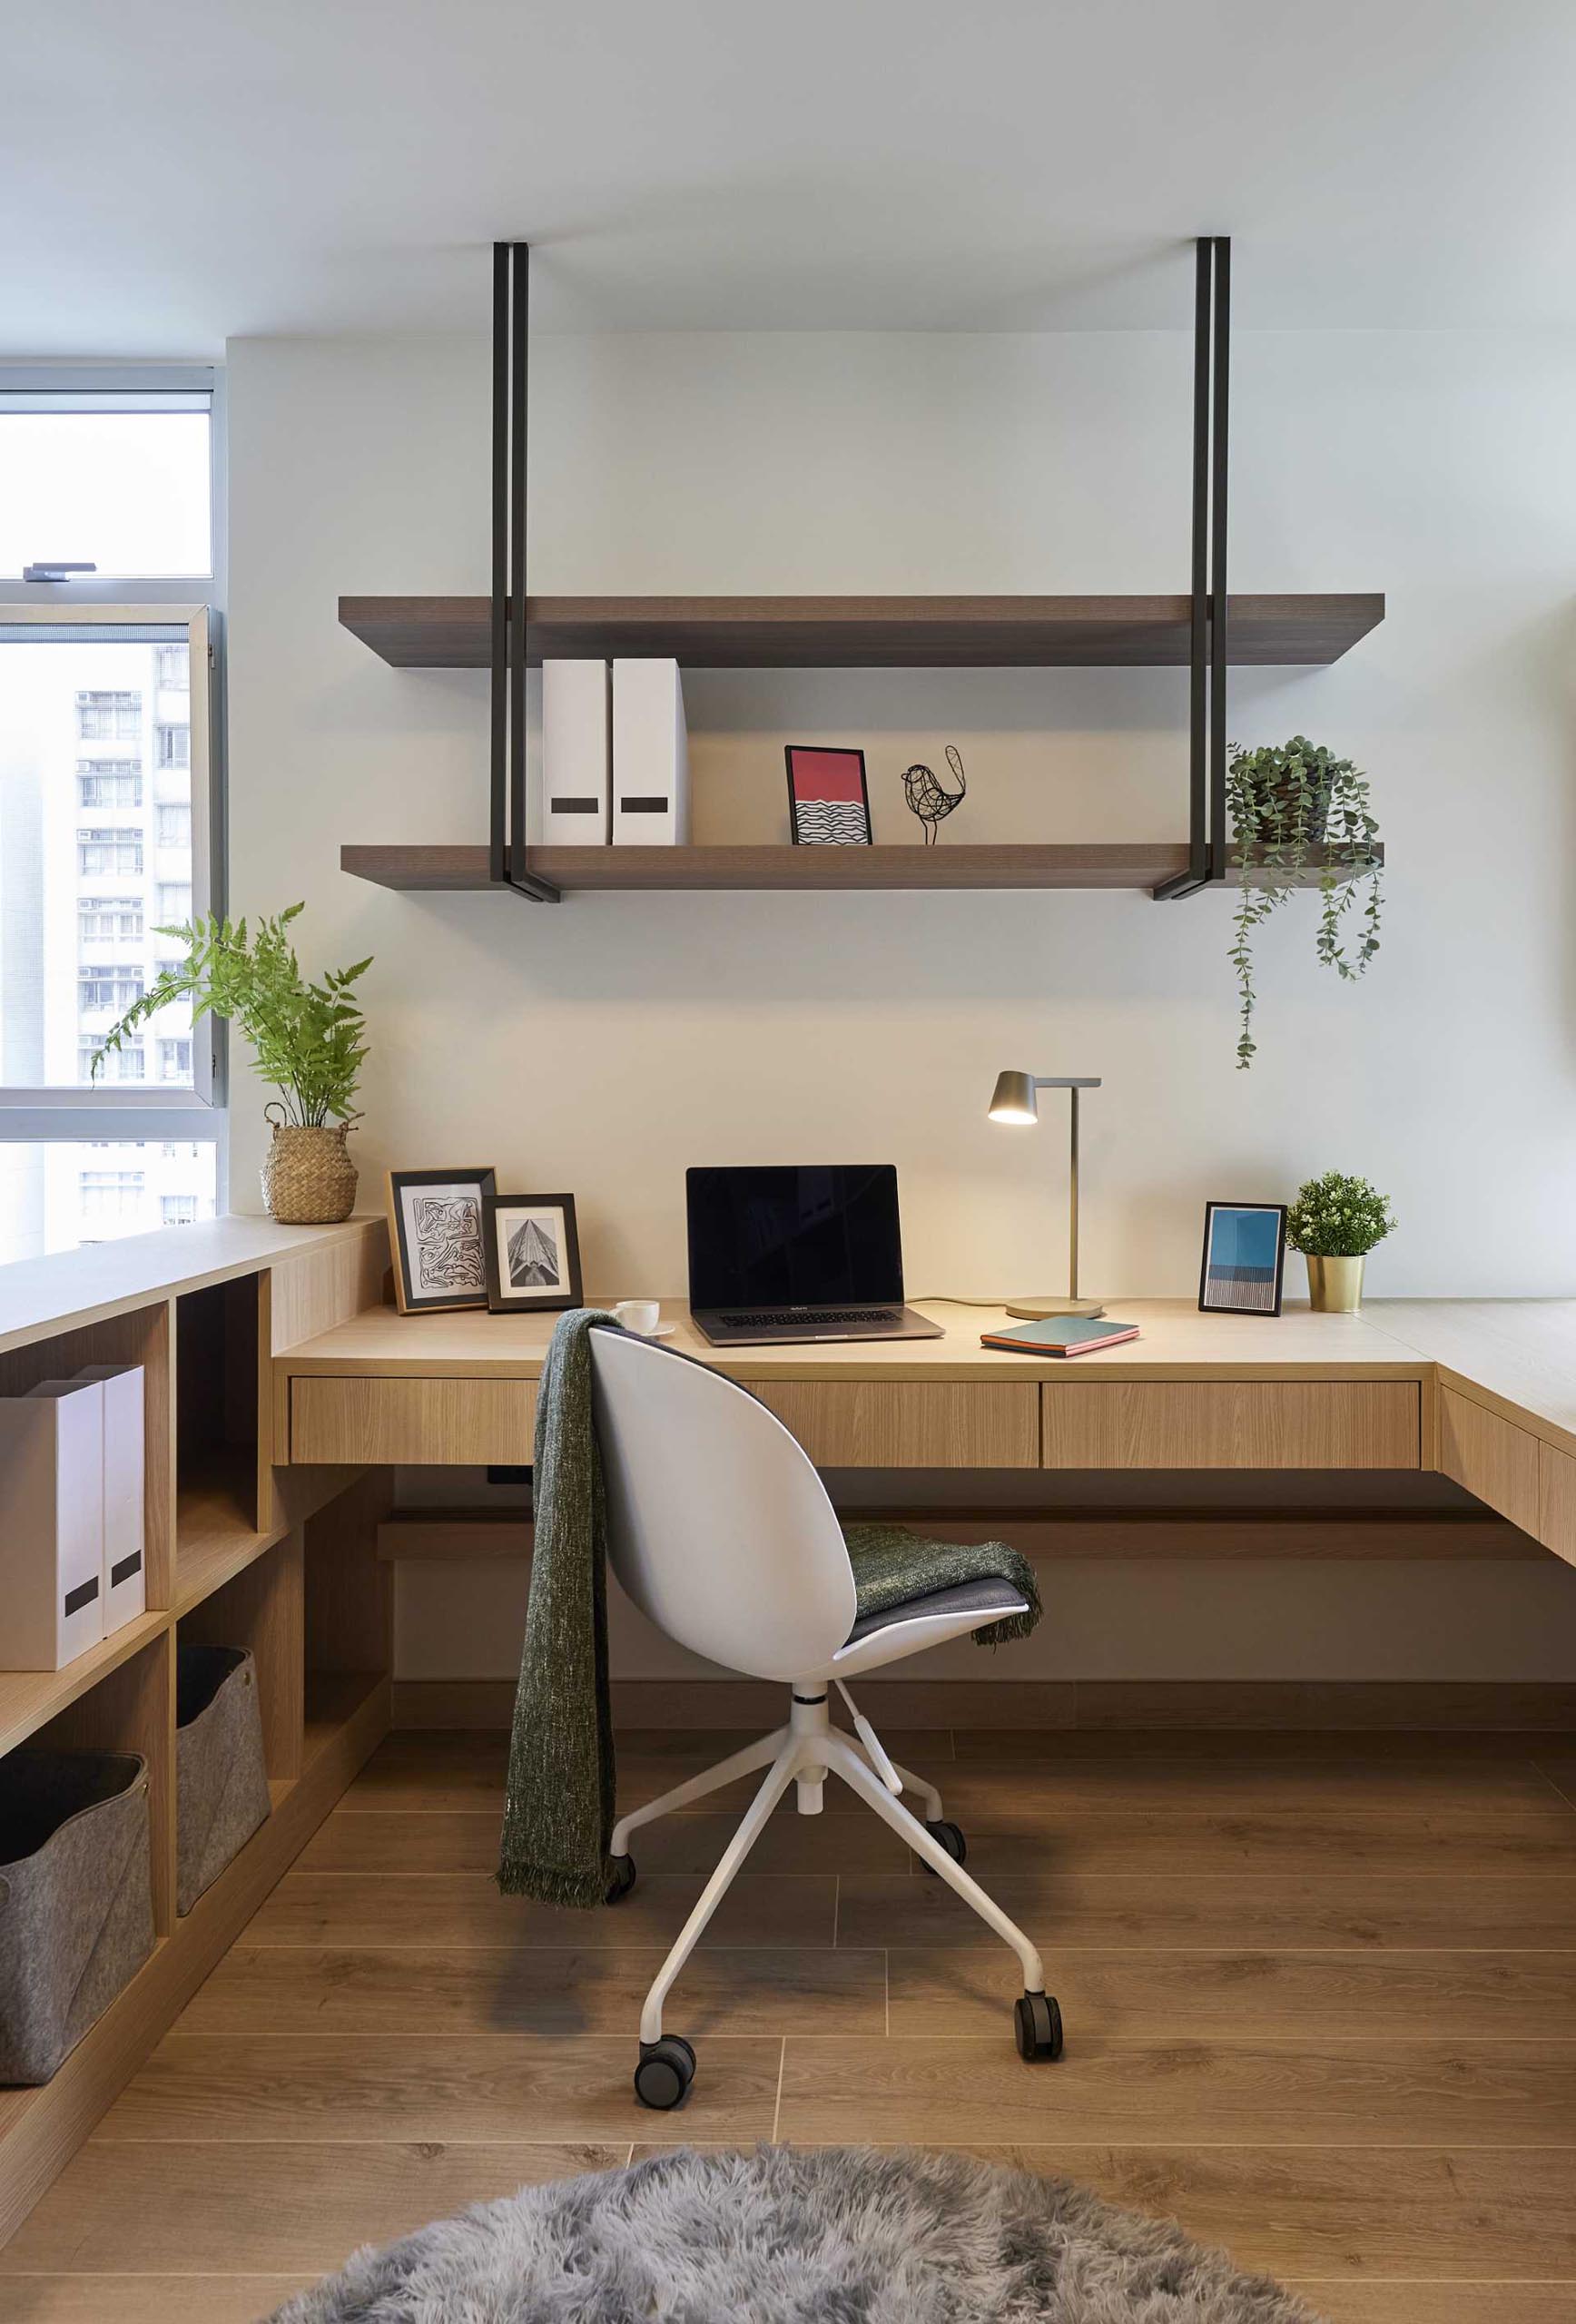 This modern built-in home office includes shelving mounted above the desk, a low cabinet on the left, and a tall cabinet with shelving on the right.